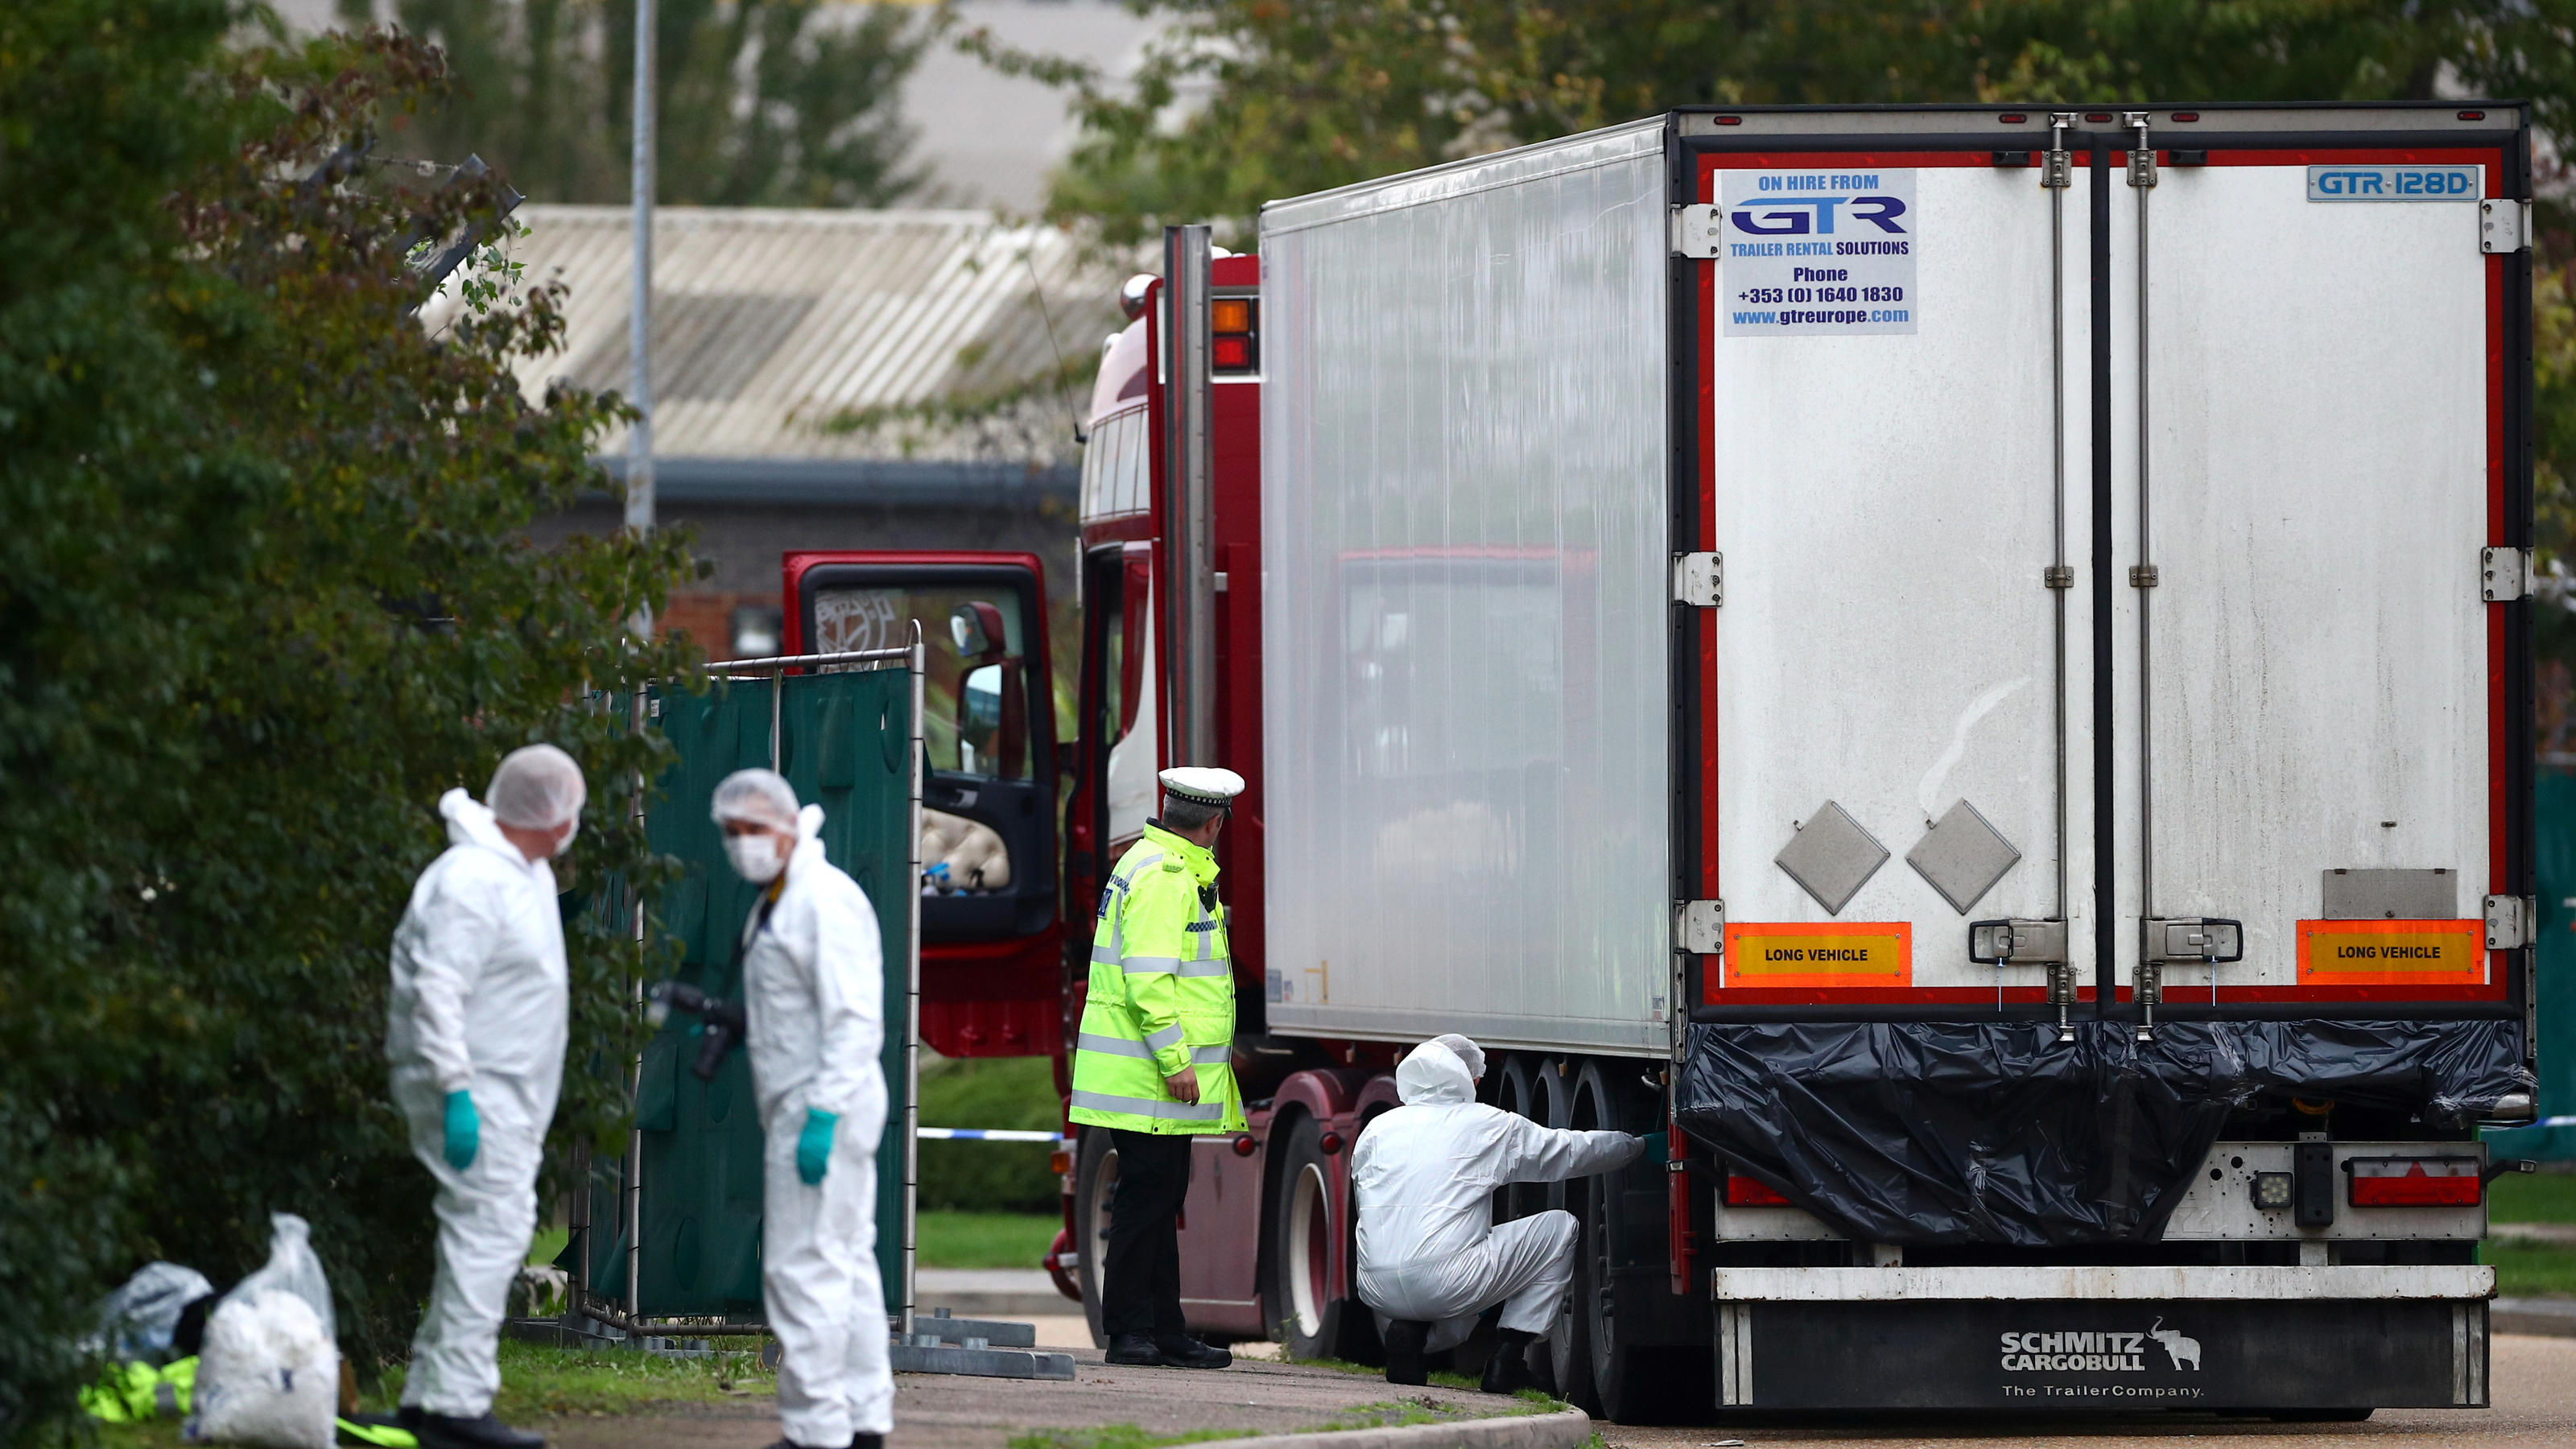 Police are seen at the scene where bodies were discovered in a lorry container, in Grays, Essex, Britain October 23, 2019.  REUTERS/Hannah McKay